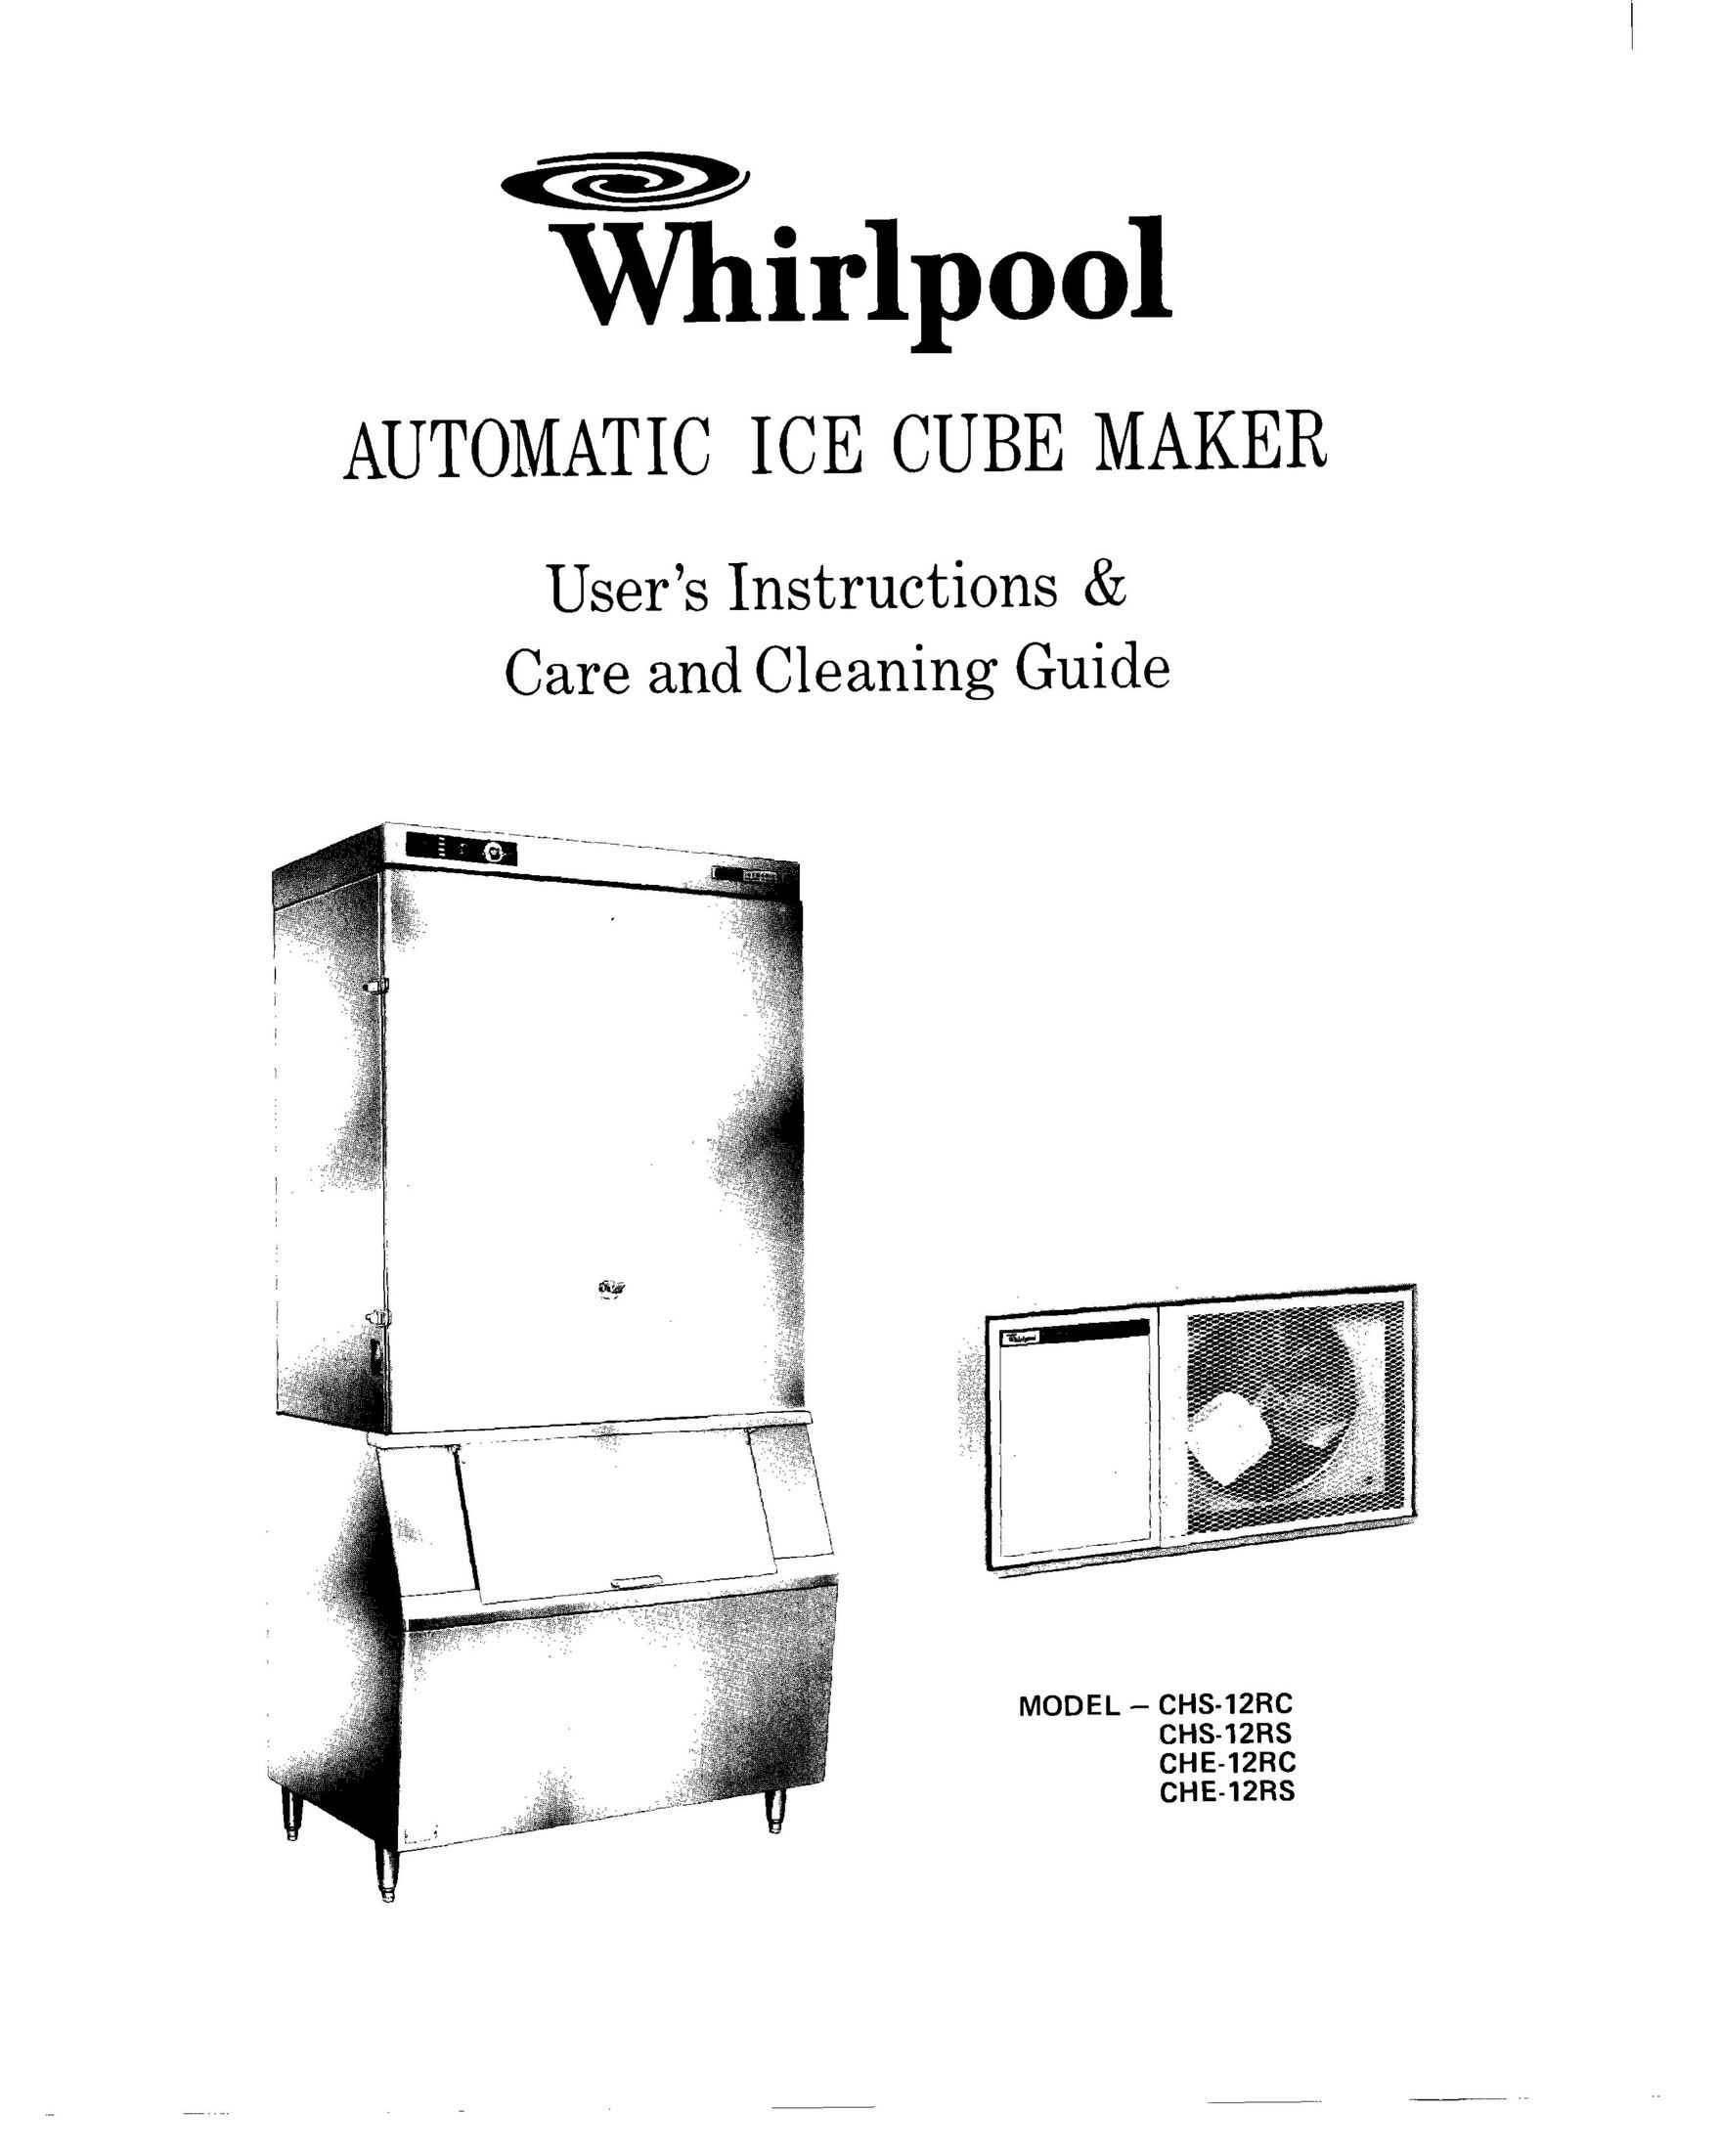 Whirlpool CHE-12RS Ice Maker User Manual